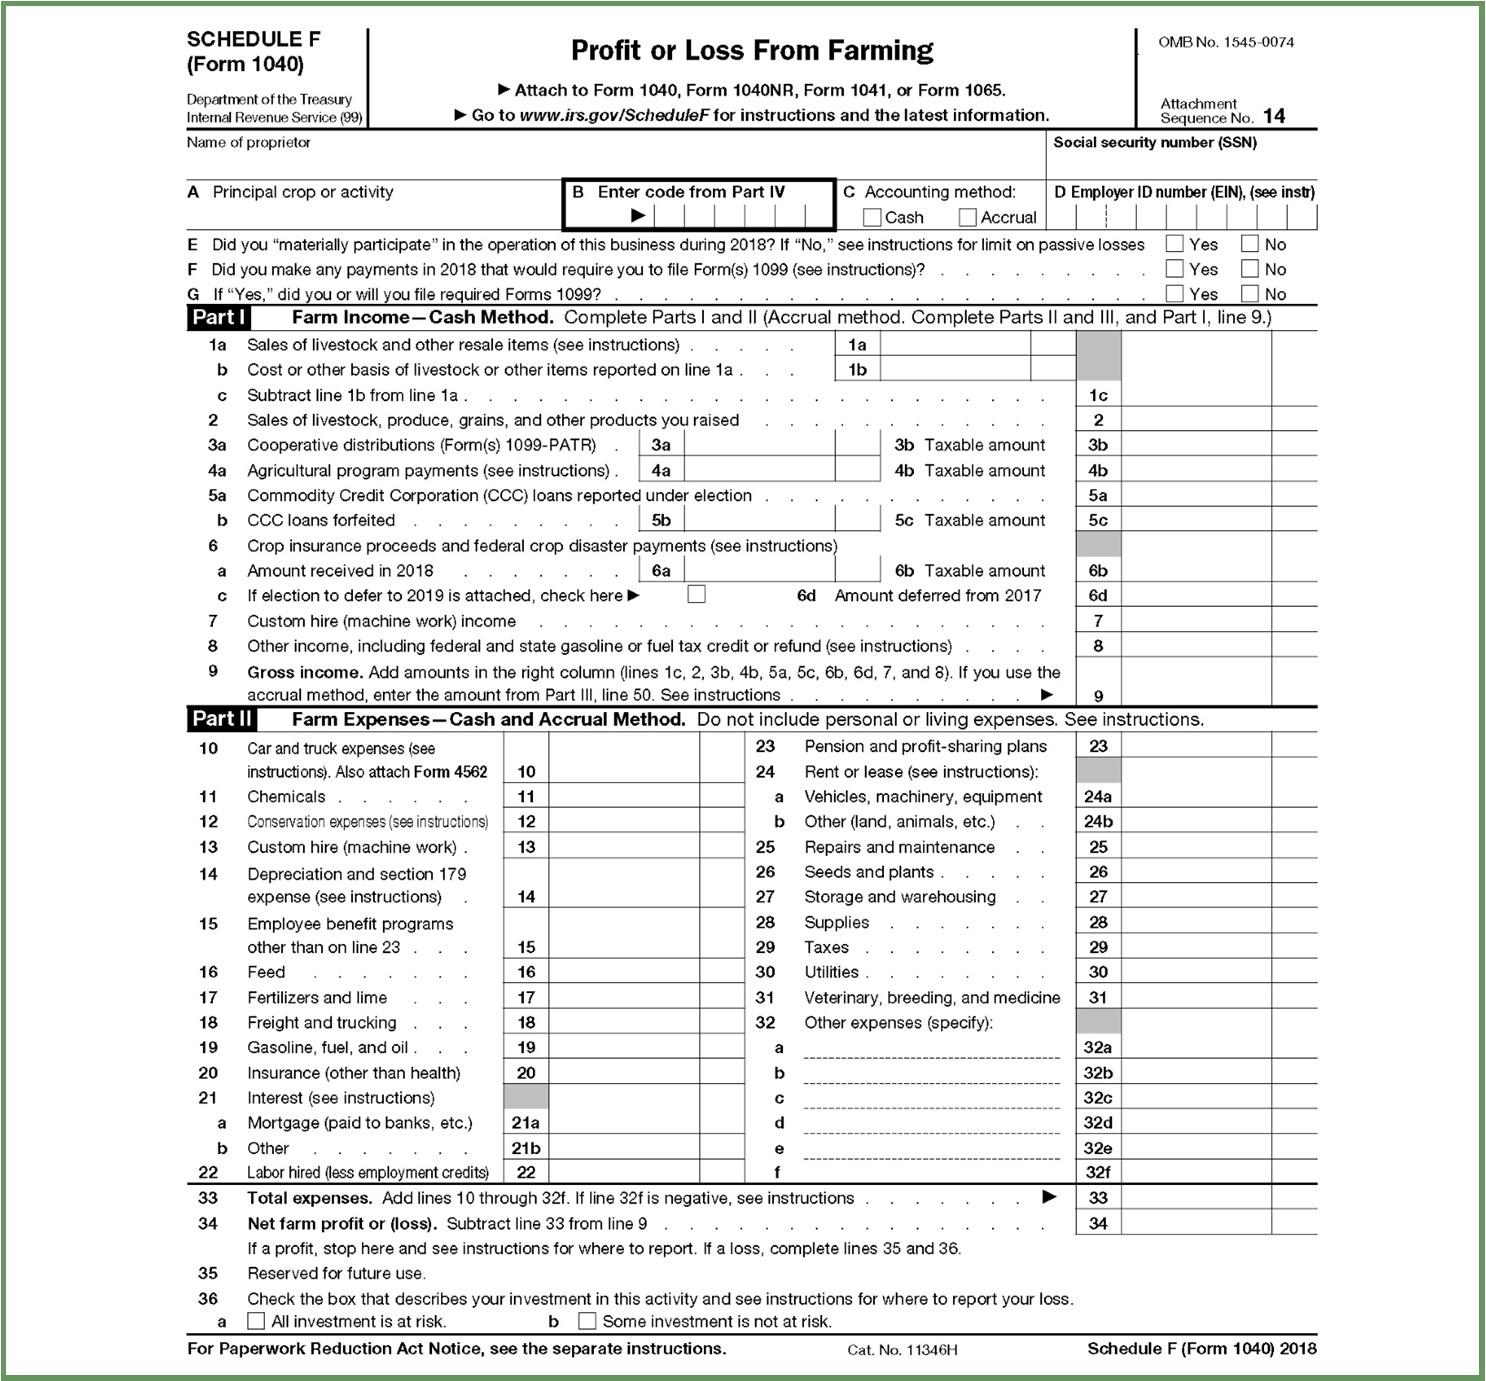 Figure 2: Internal Revenue Service Schedule (IRS) F (Form 1040) is the form required by the IRS to calculate and report profit for tax purposes. Note that this form is subject to change from year to year. You can access the up to date form at https://www.irs.gov/ 